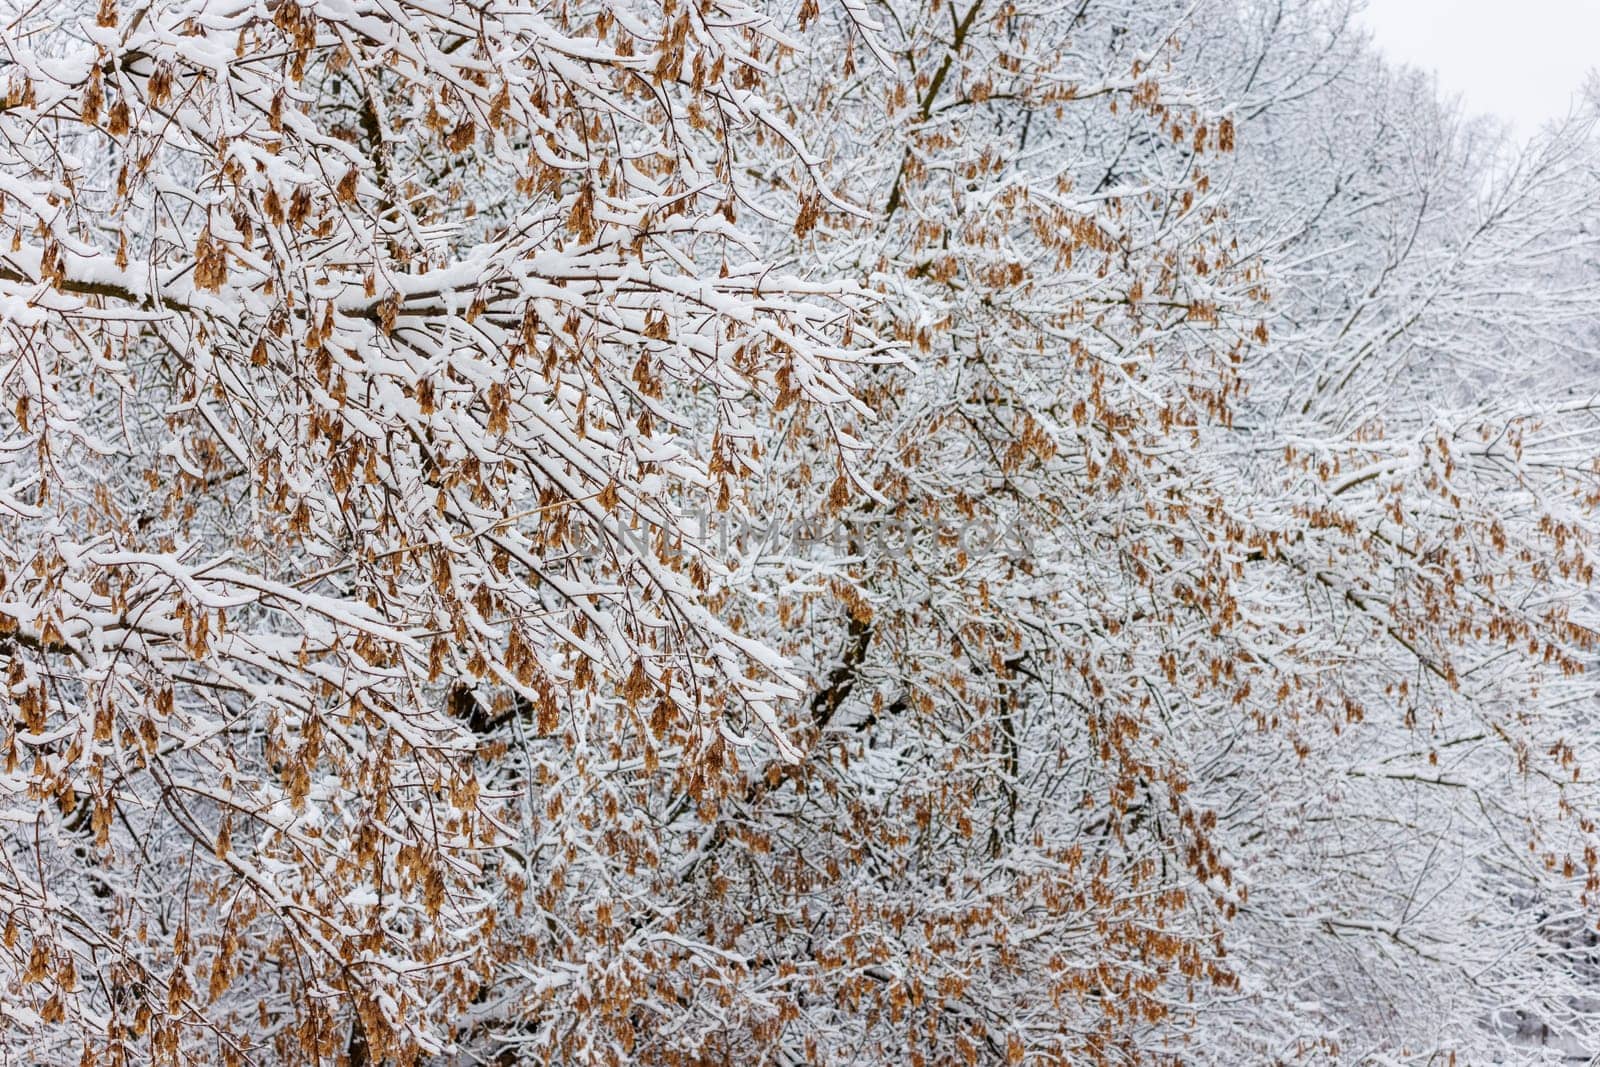 Maple tree is covered in a thick layer of icy snow, creating a beautiful winter background. The frost glistens on the twigs and branches, turning the plant into a frozen masterpiece.